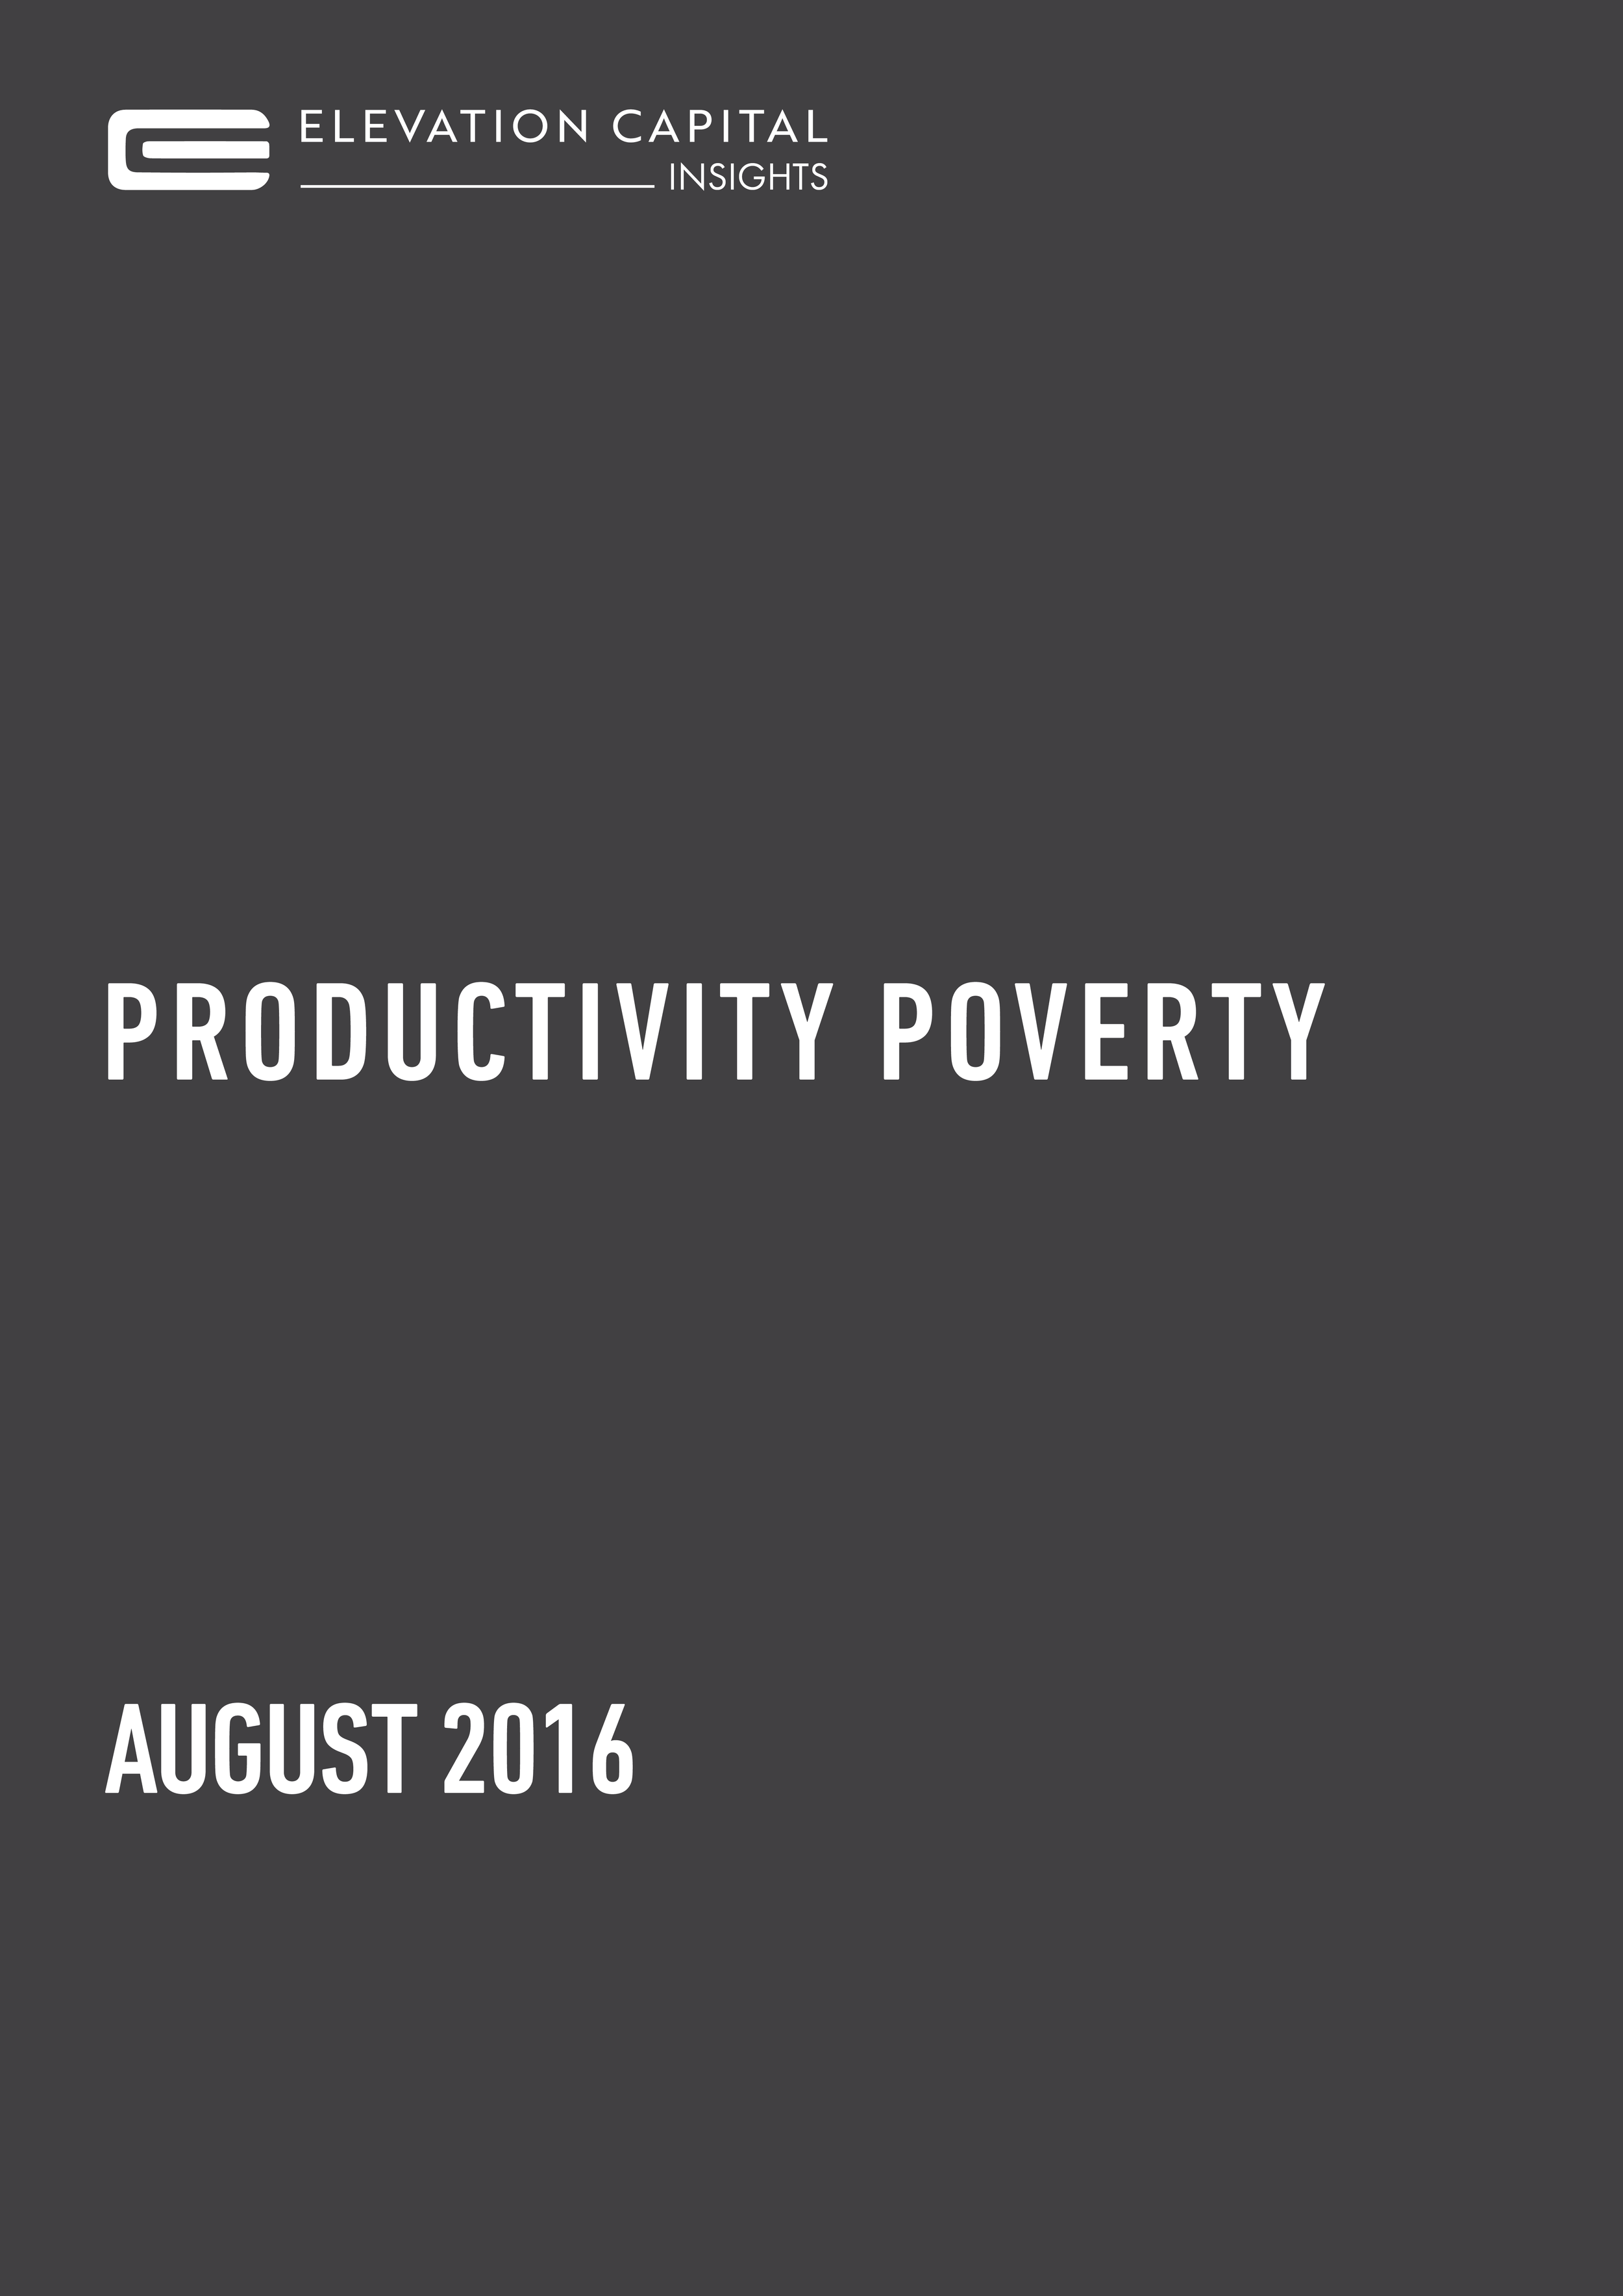 Productivity Poverty - August 2016